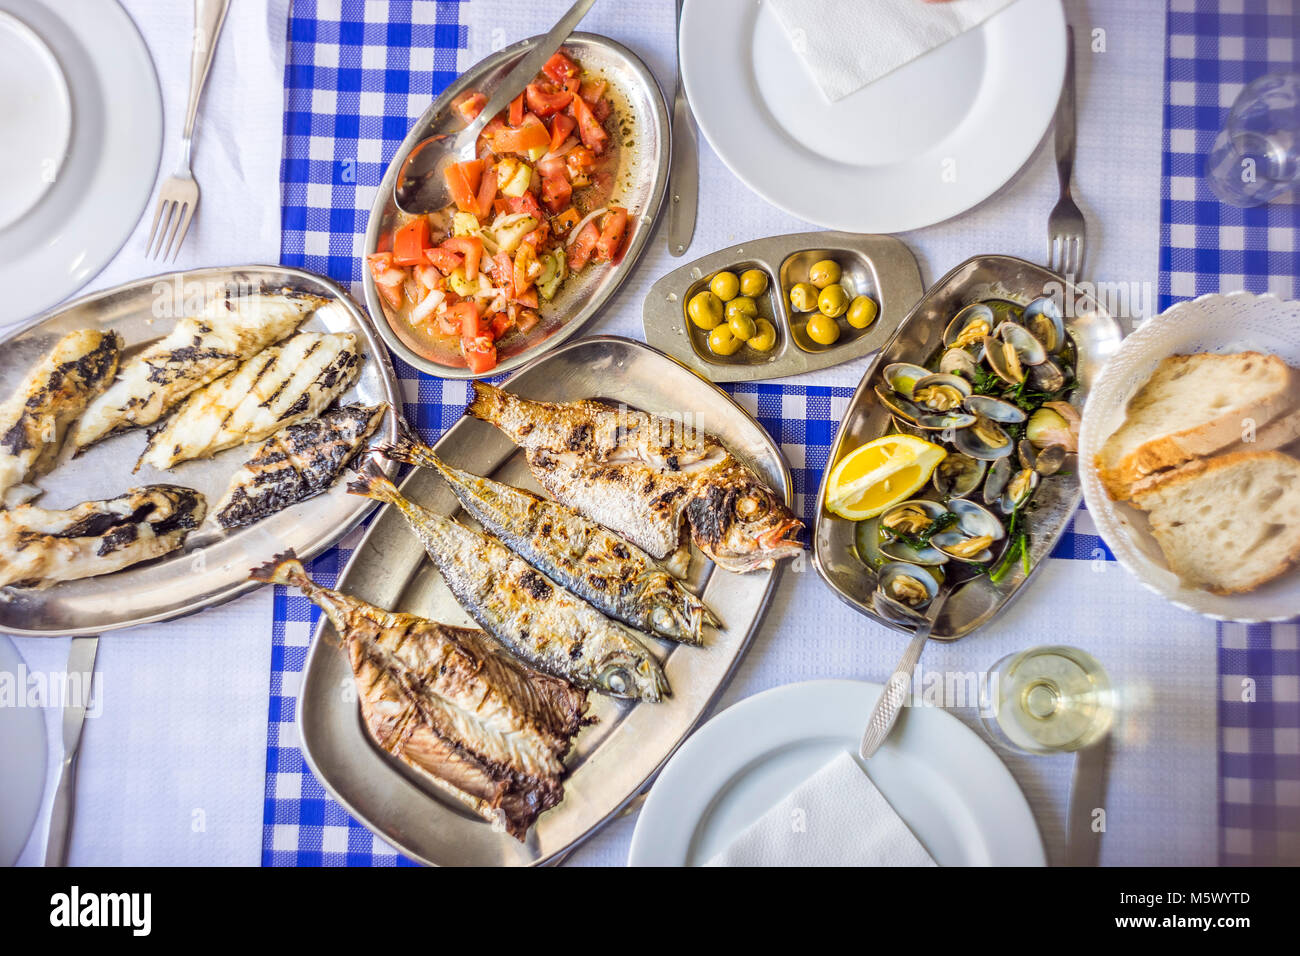 Fish feast: sea bass, golden, horse mackerel accompanied with tomato salad, clams, bread and white wine, Portugal Stock Photo